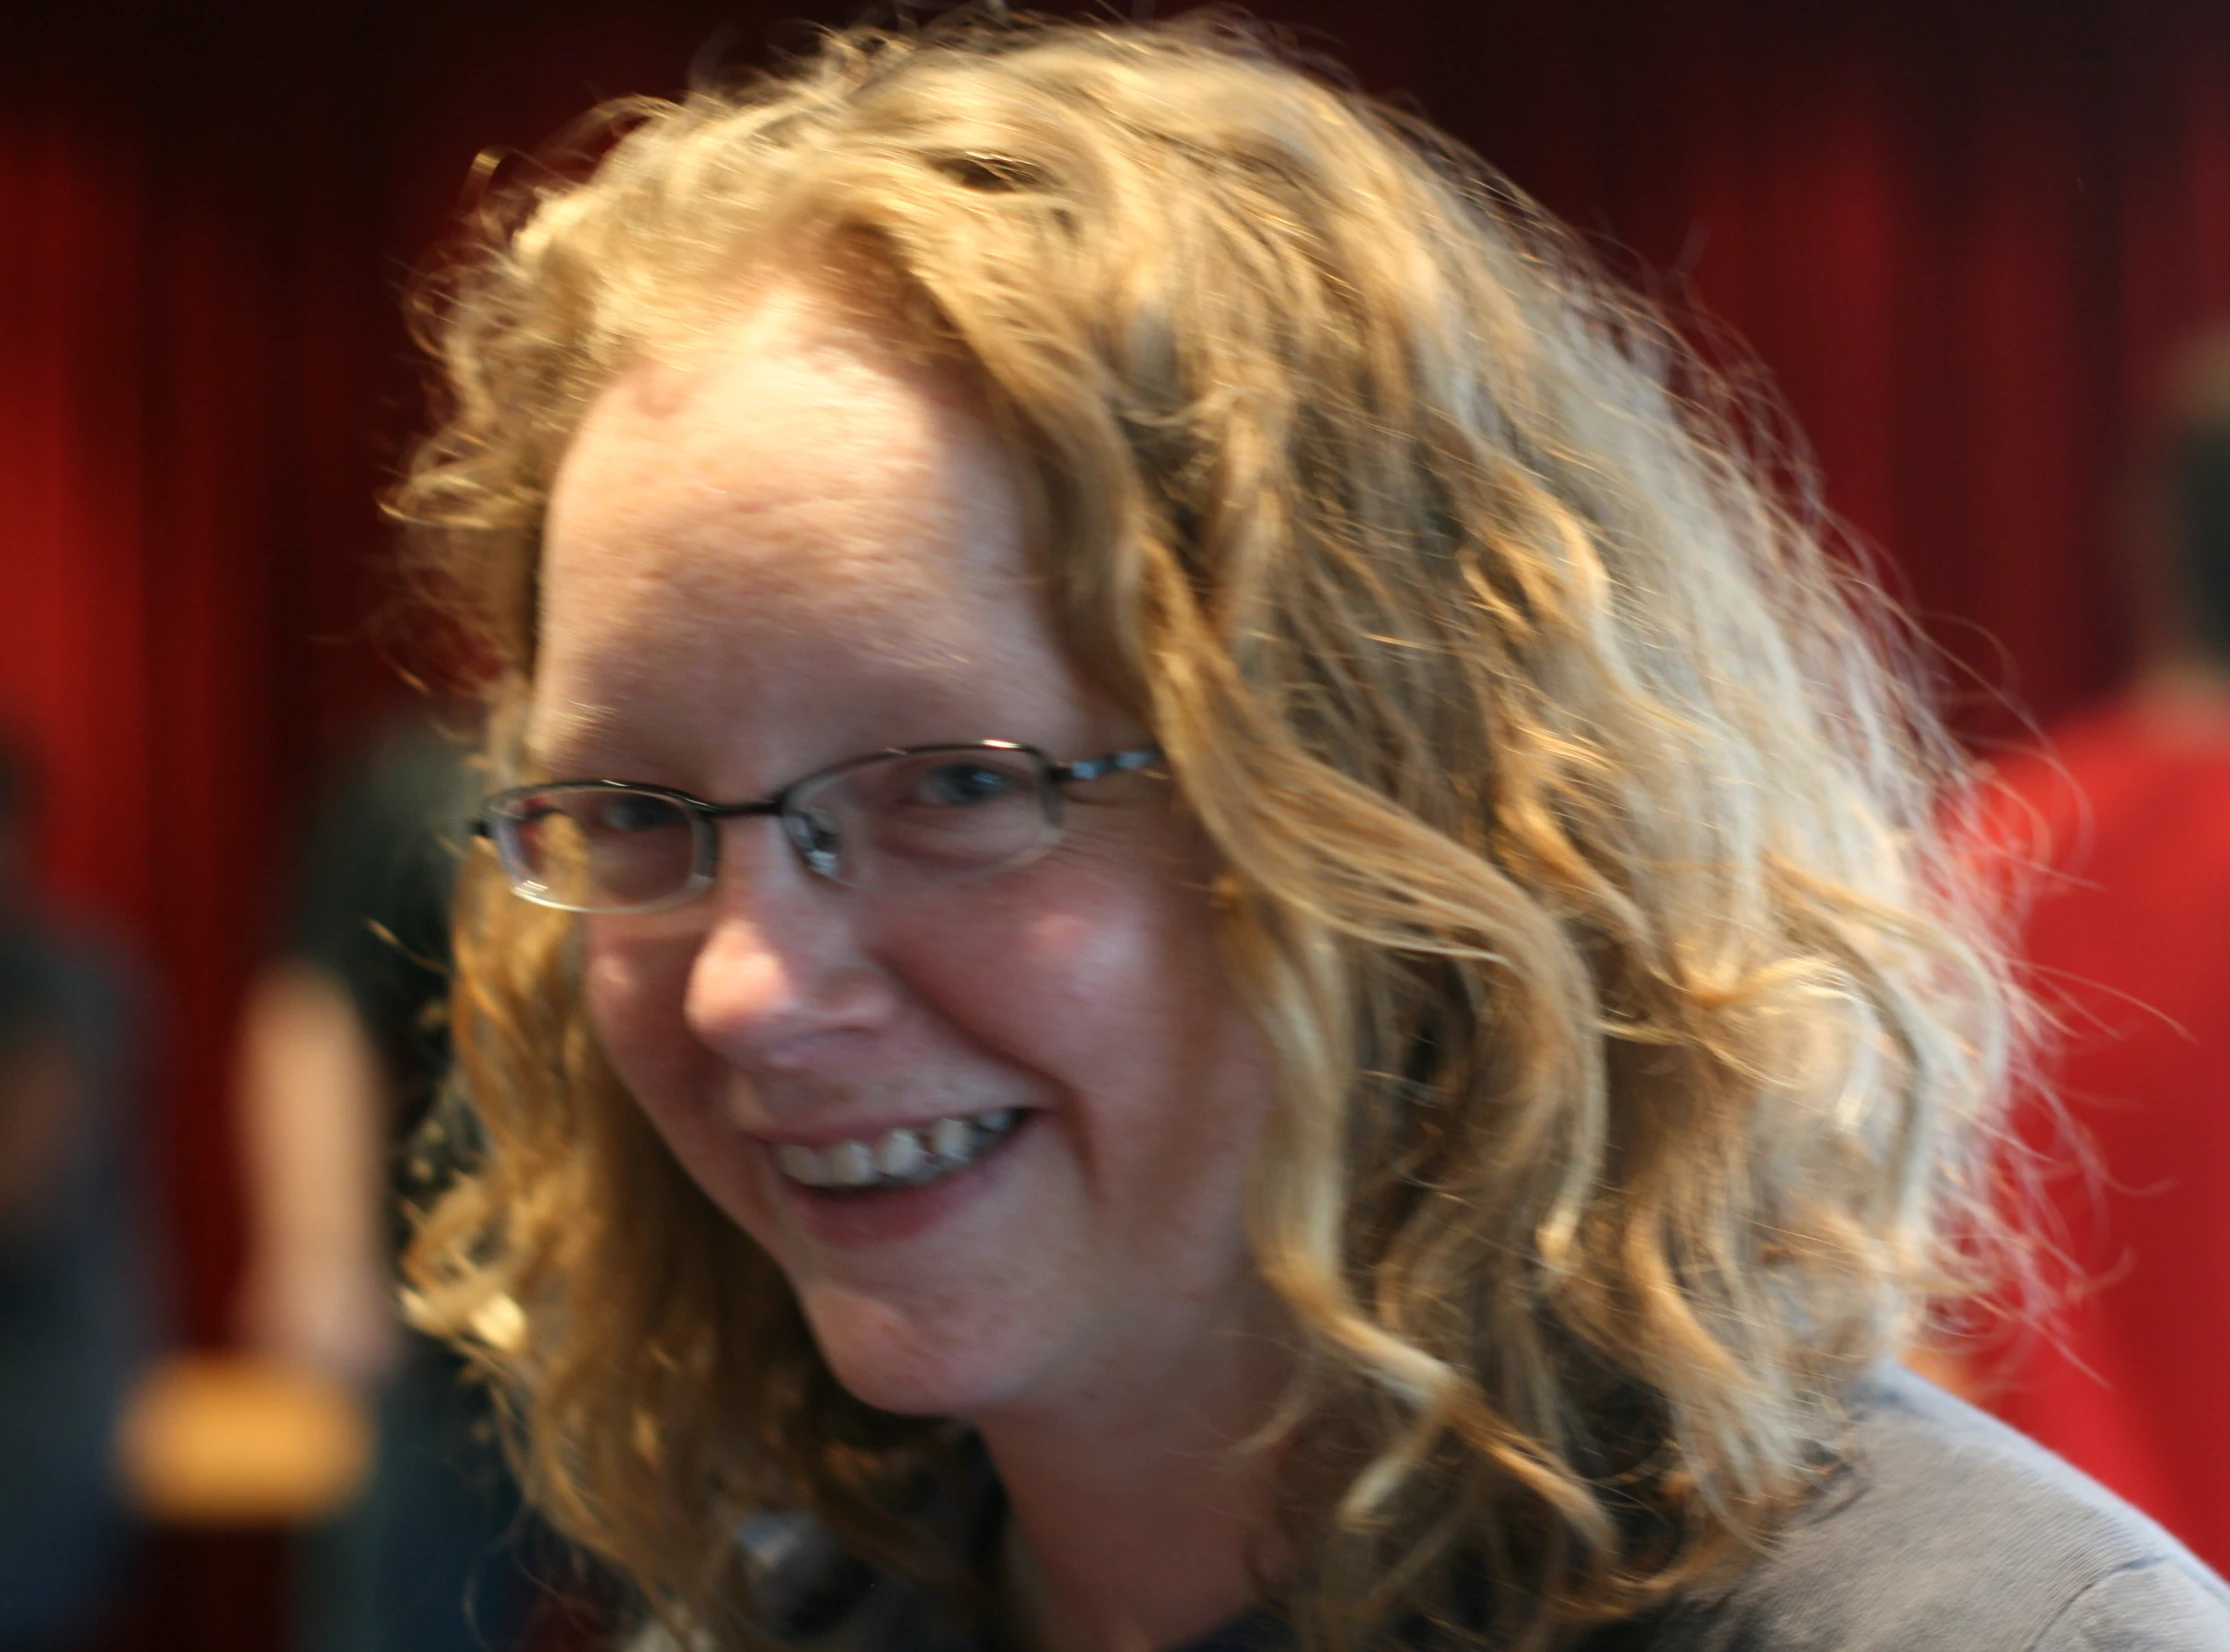 a close up view of a woman with glasses